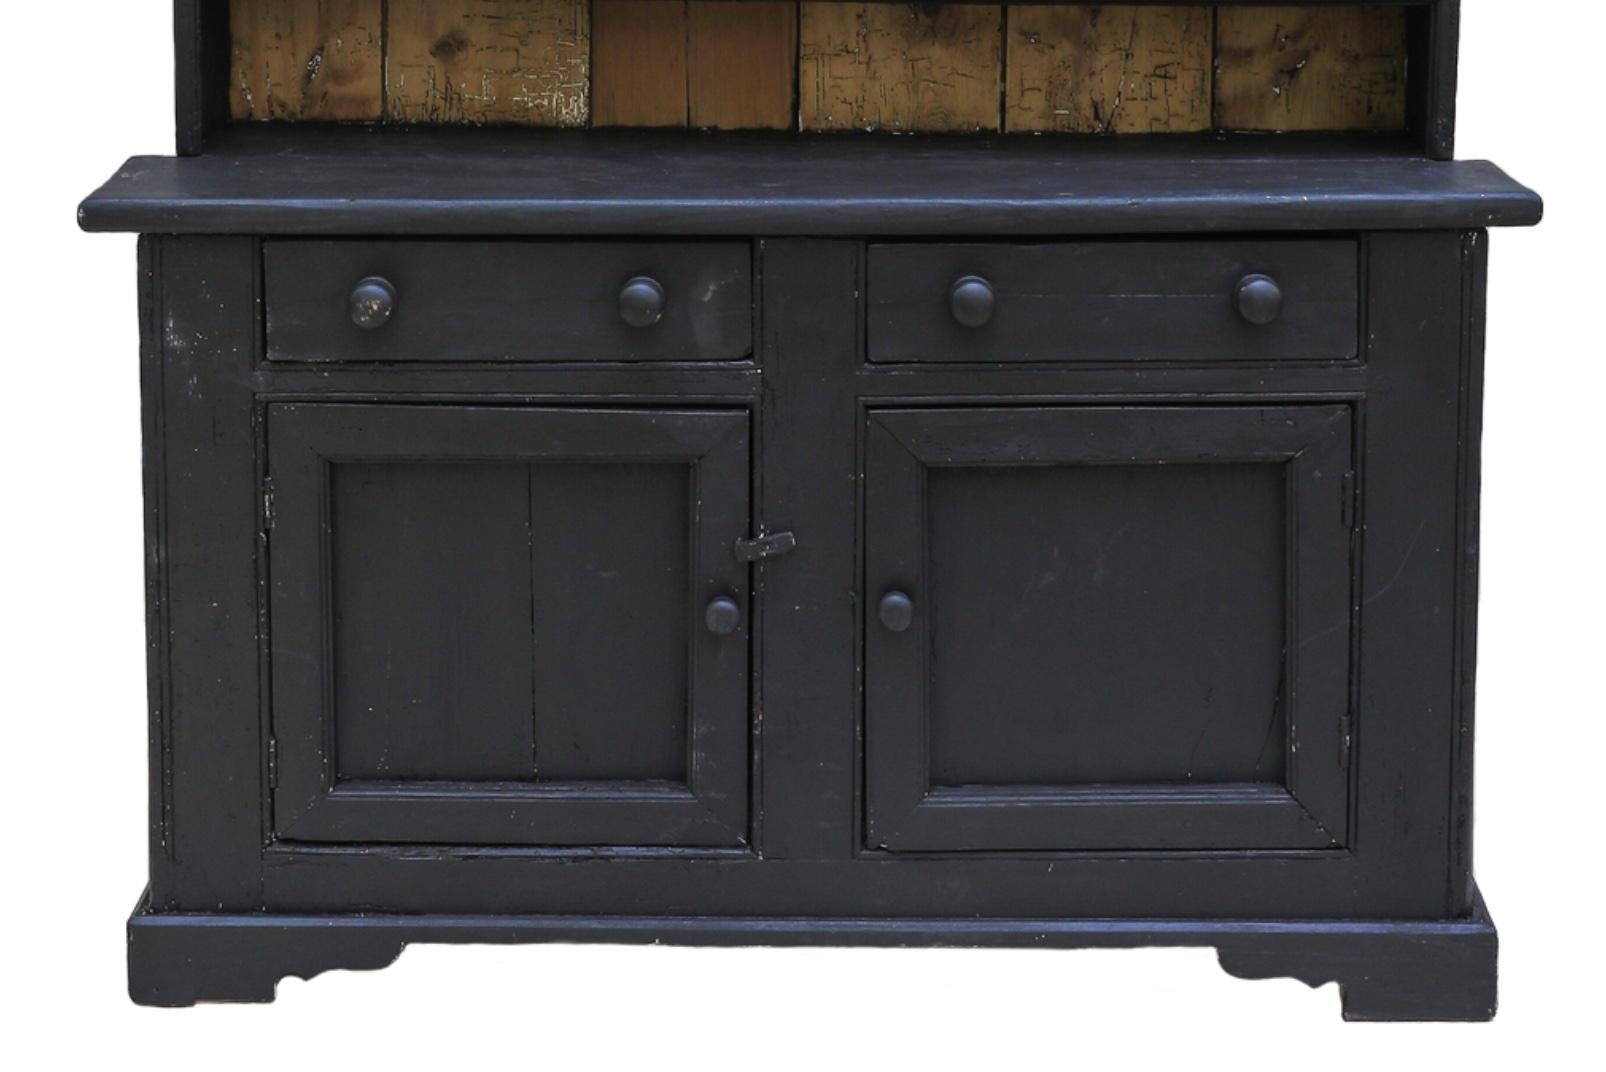 Presenting a quintessentially English hutch in a single-piece design, brimming with an abundance of color and character. This hutch proudly displays the charming signs of age, adding to its authentic appeal. Ebonized with a deep black hue, we hold a